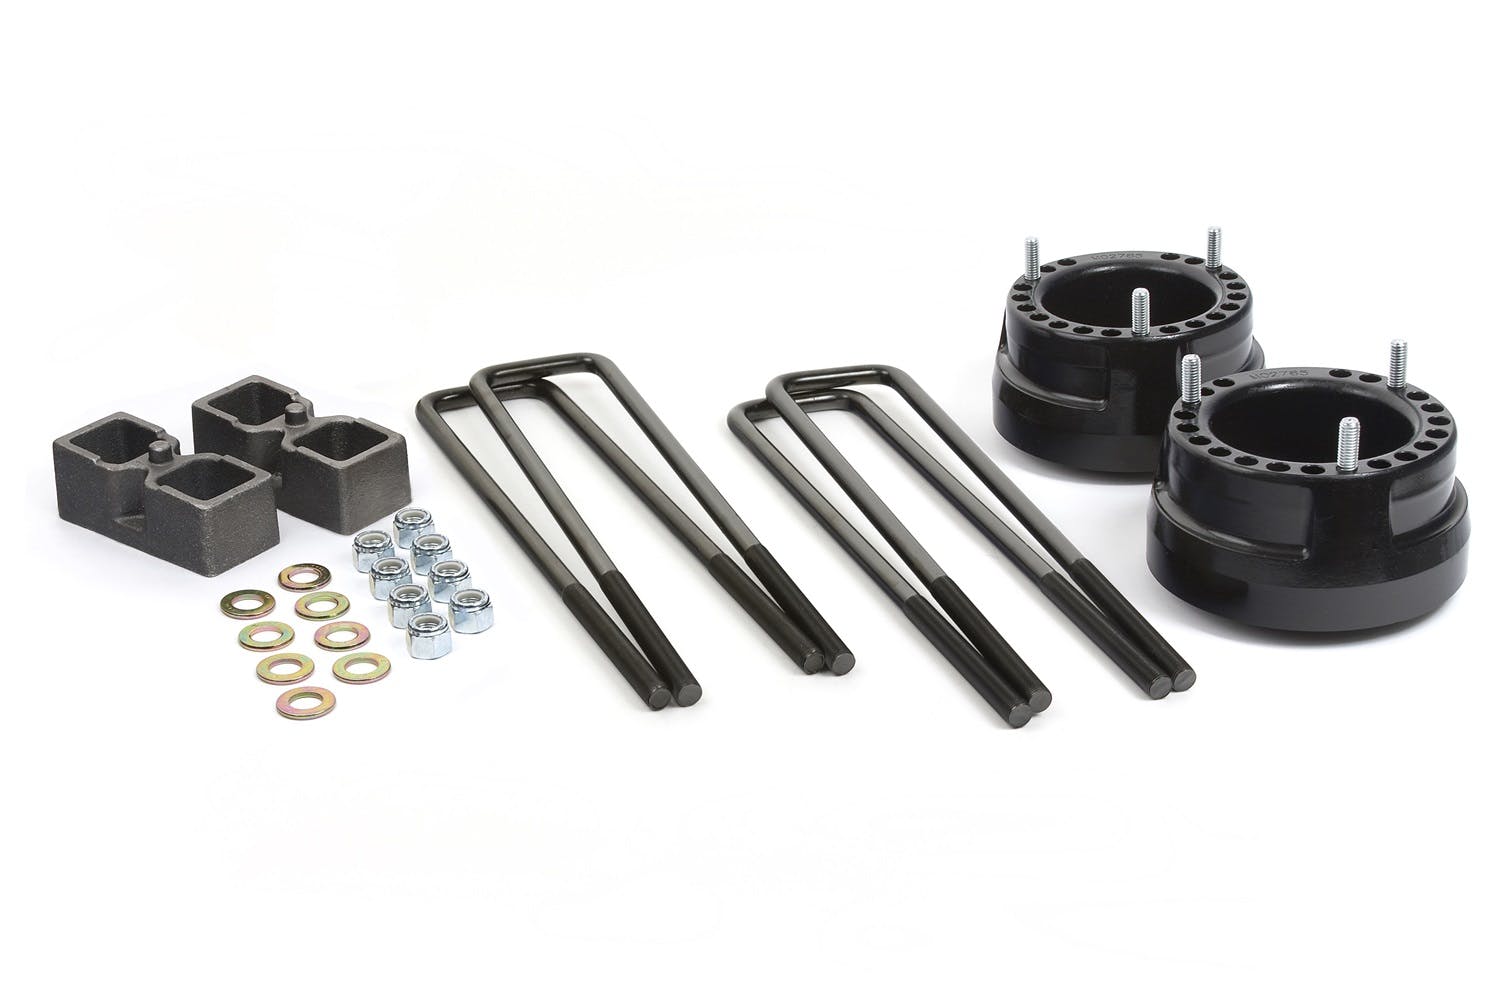 Daystar KC09122BK Suspension Lift Kit; 2 inch Front Coil Spring Spacers; 2 inch Rear Blocks w/ U-bolts